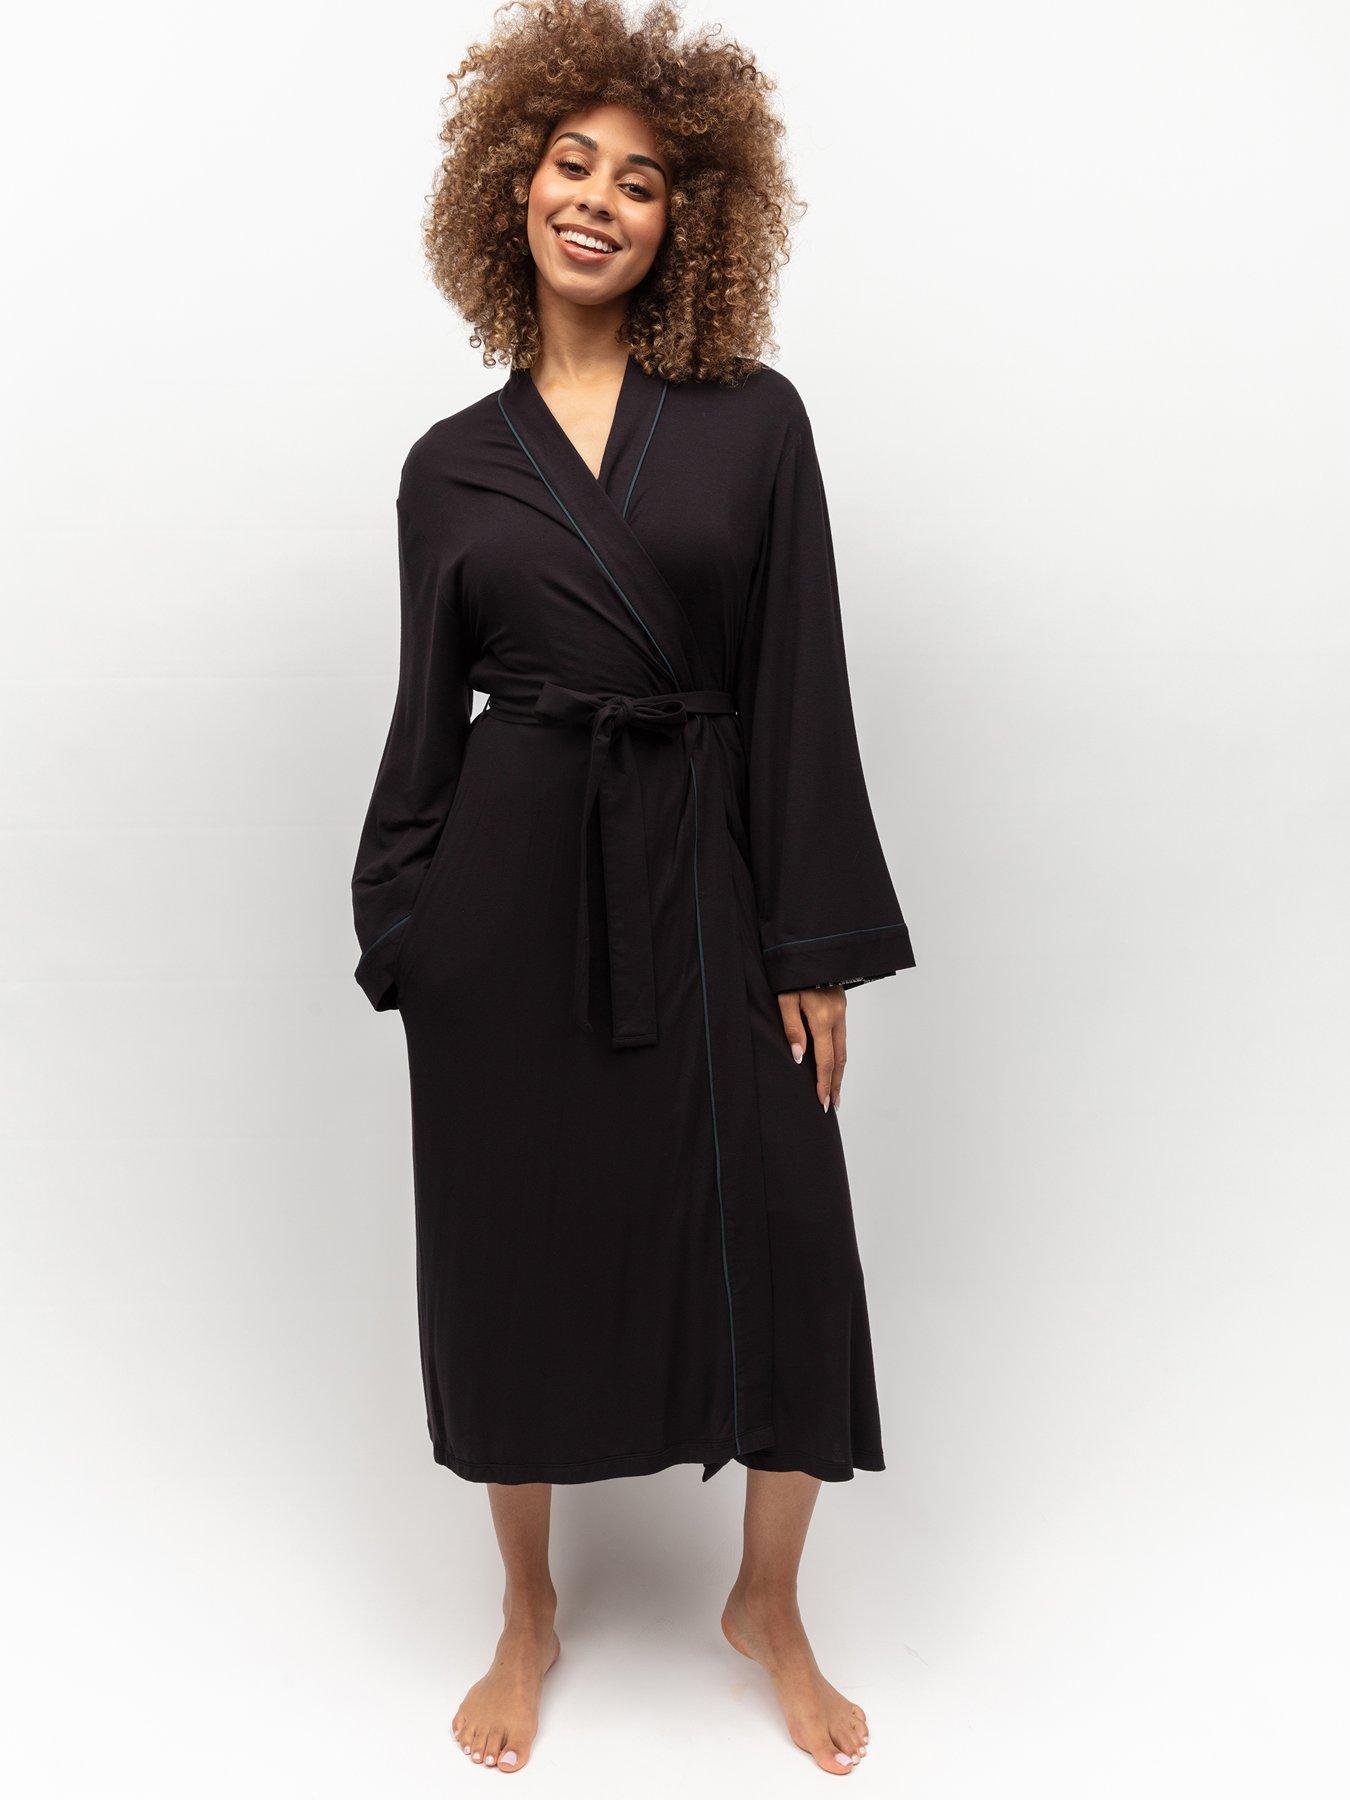 This Boux Avenue Dressing Gown is selling every 10 Mins!